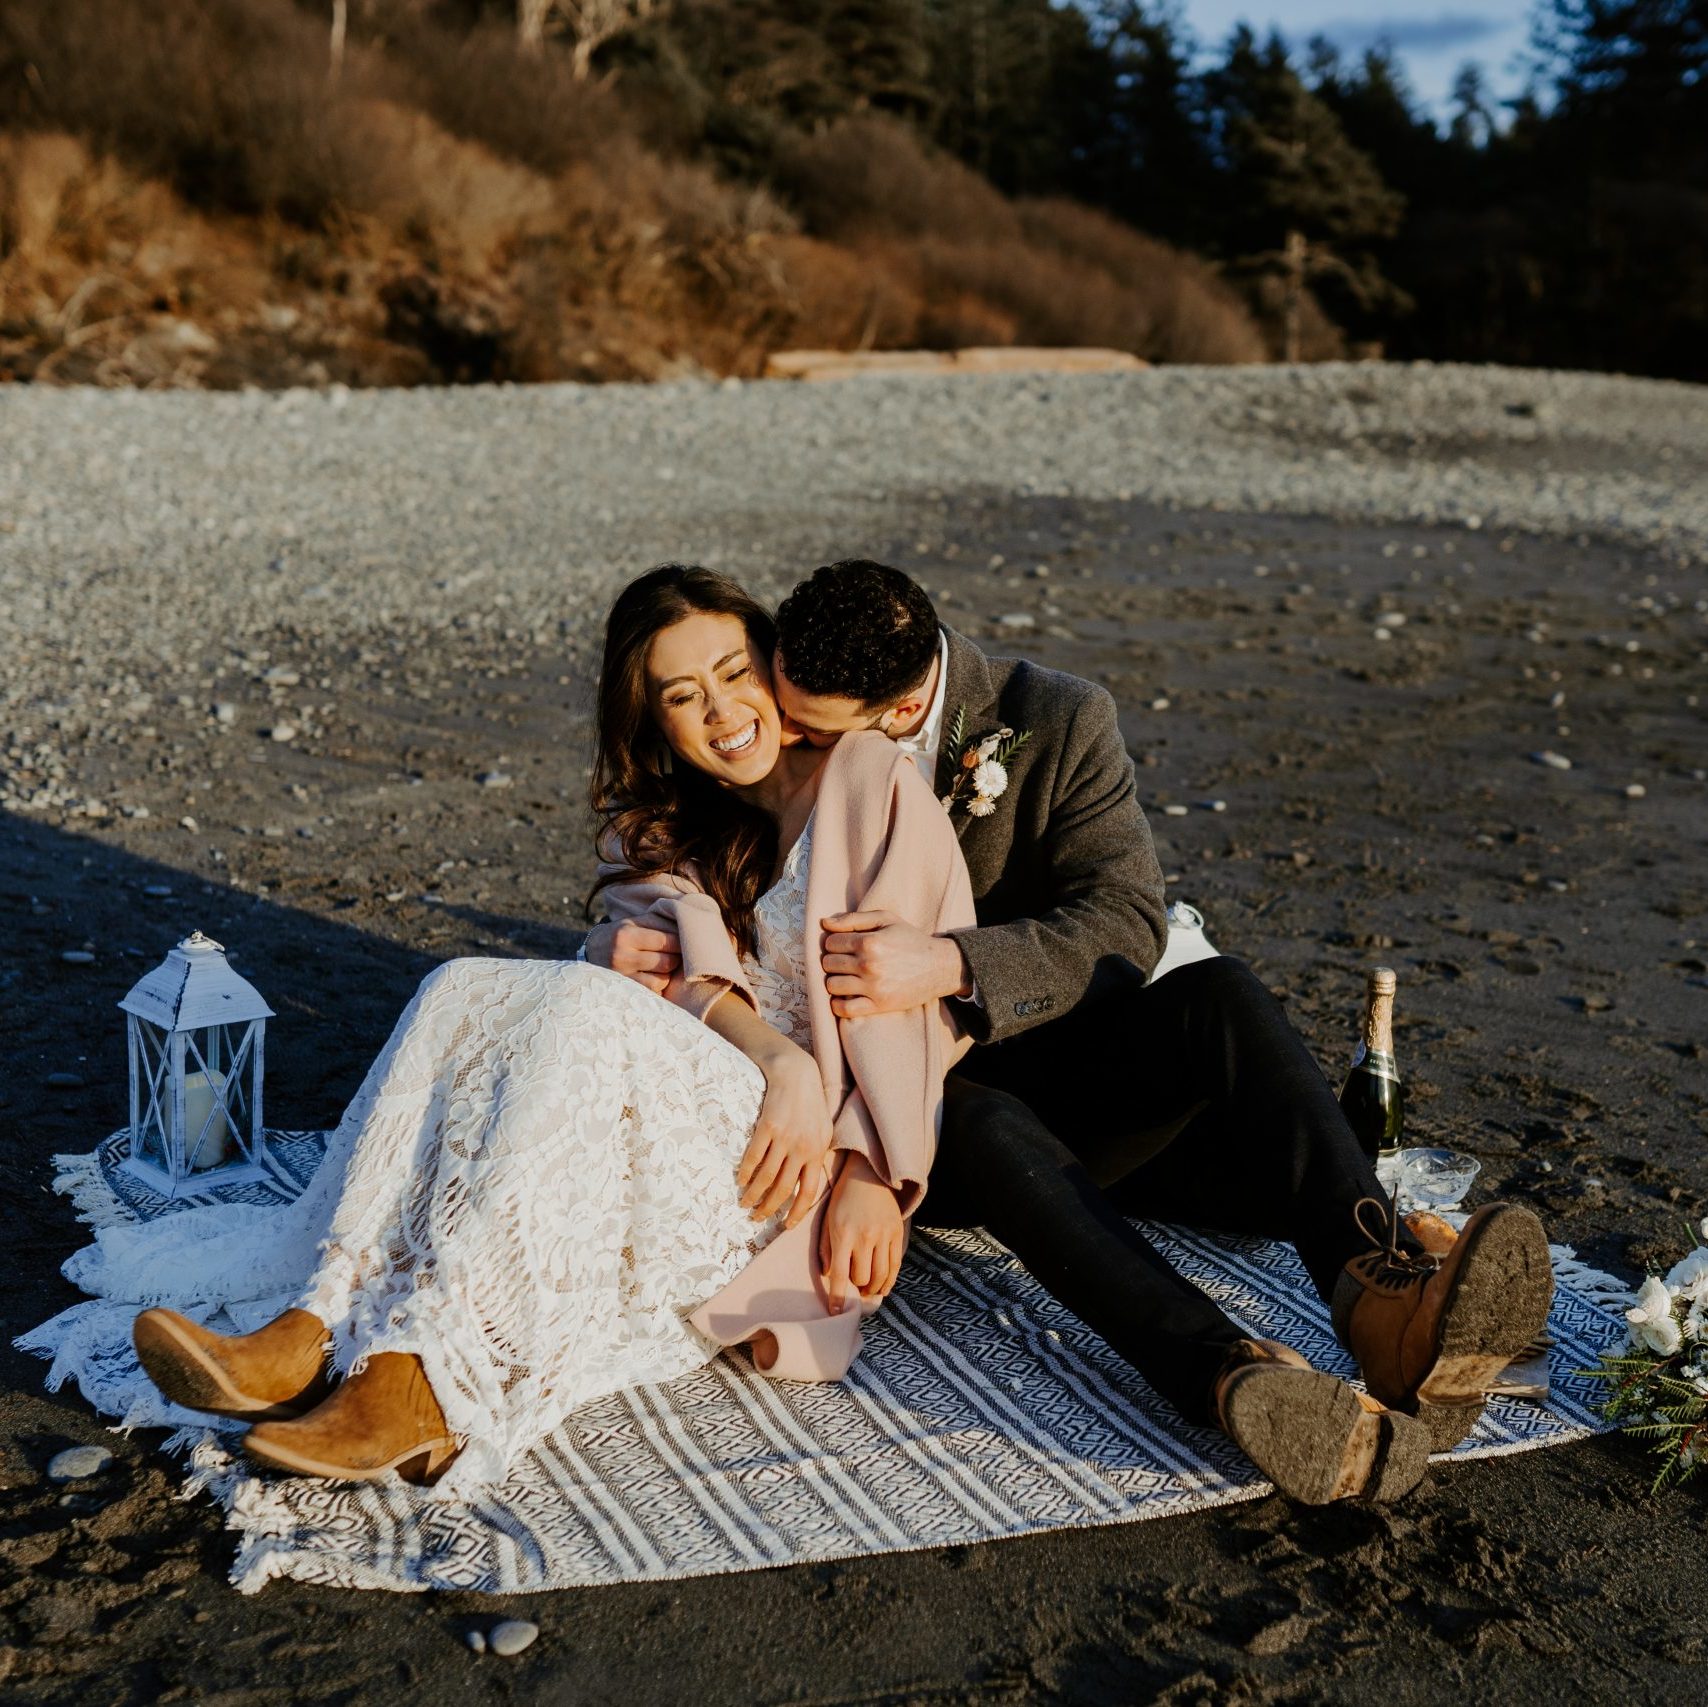 Eloping couple snuggling on a blanket at the beach